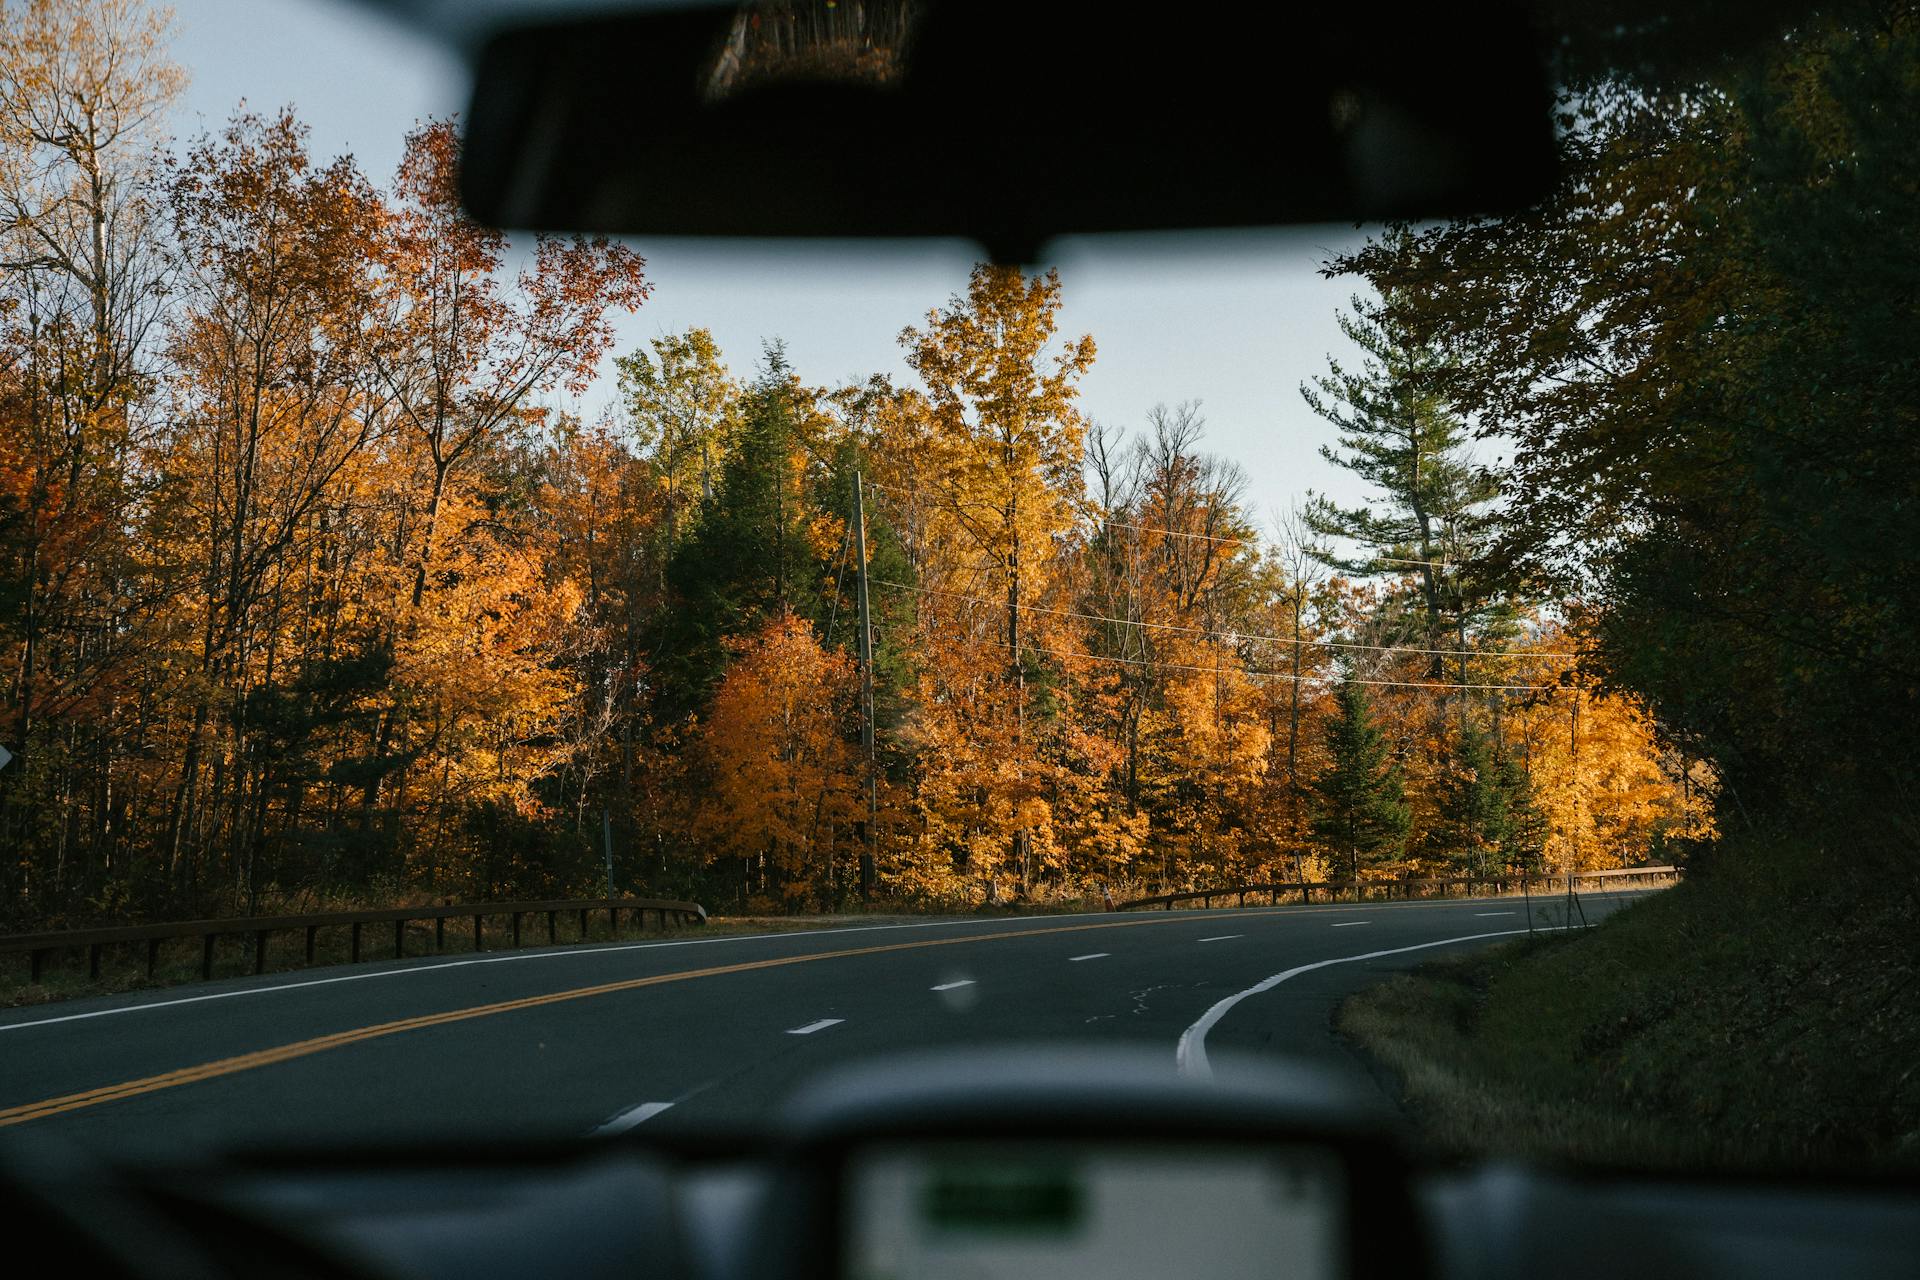 Modern car driving along curvy asphalt road amidst lush autumn trees in countryside on sunny day